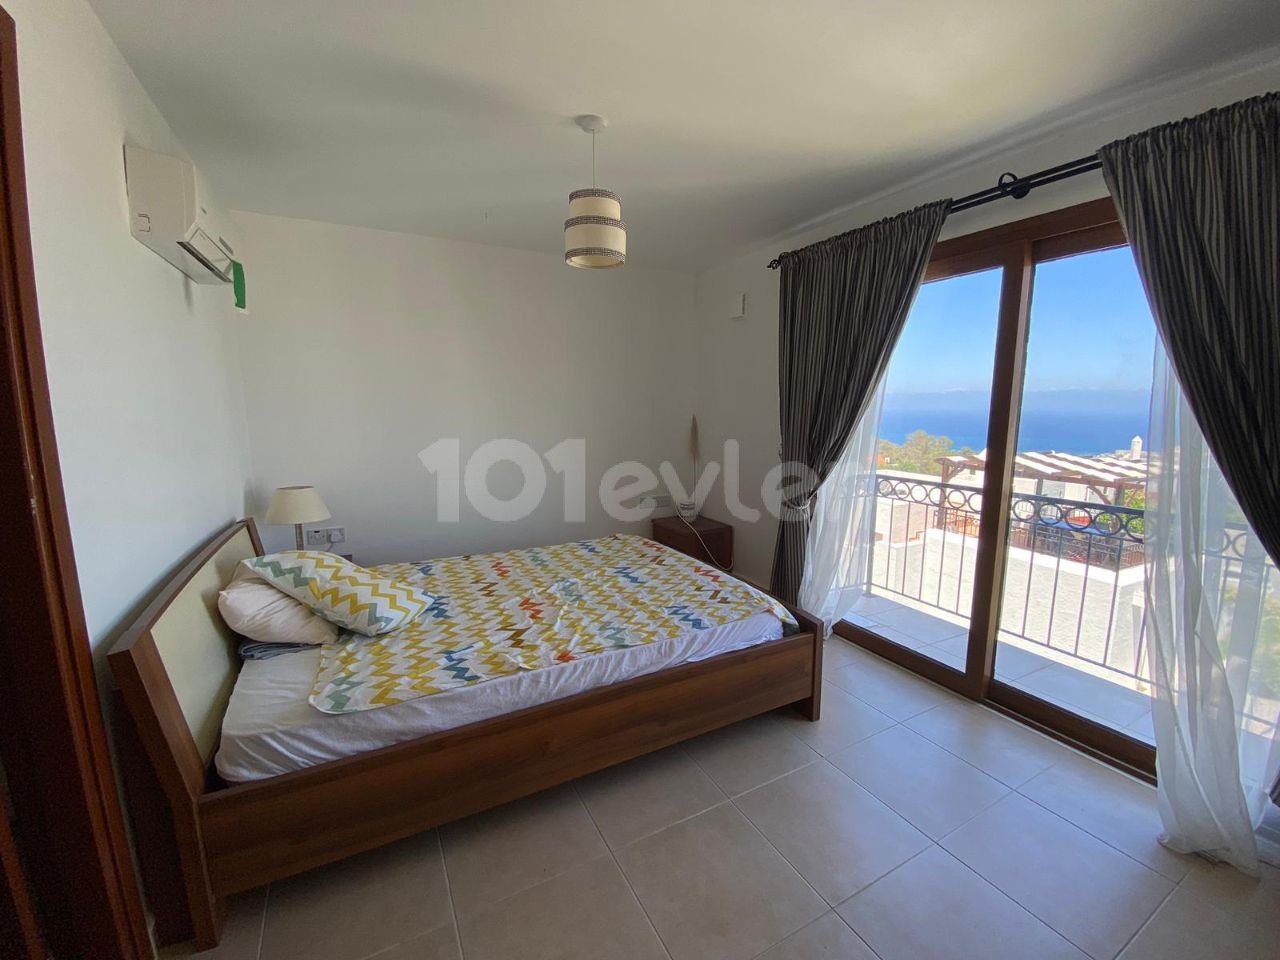 2+1 villa in Edremit for rent. In great residential complex located on mountains with panoramic sea view